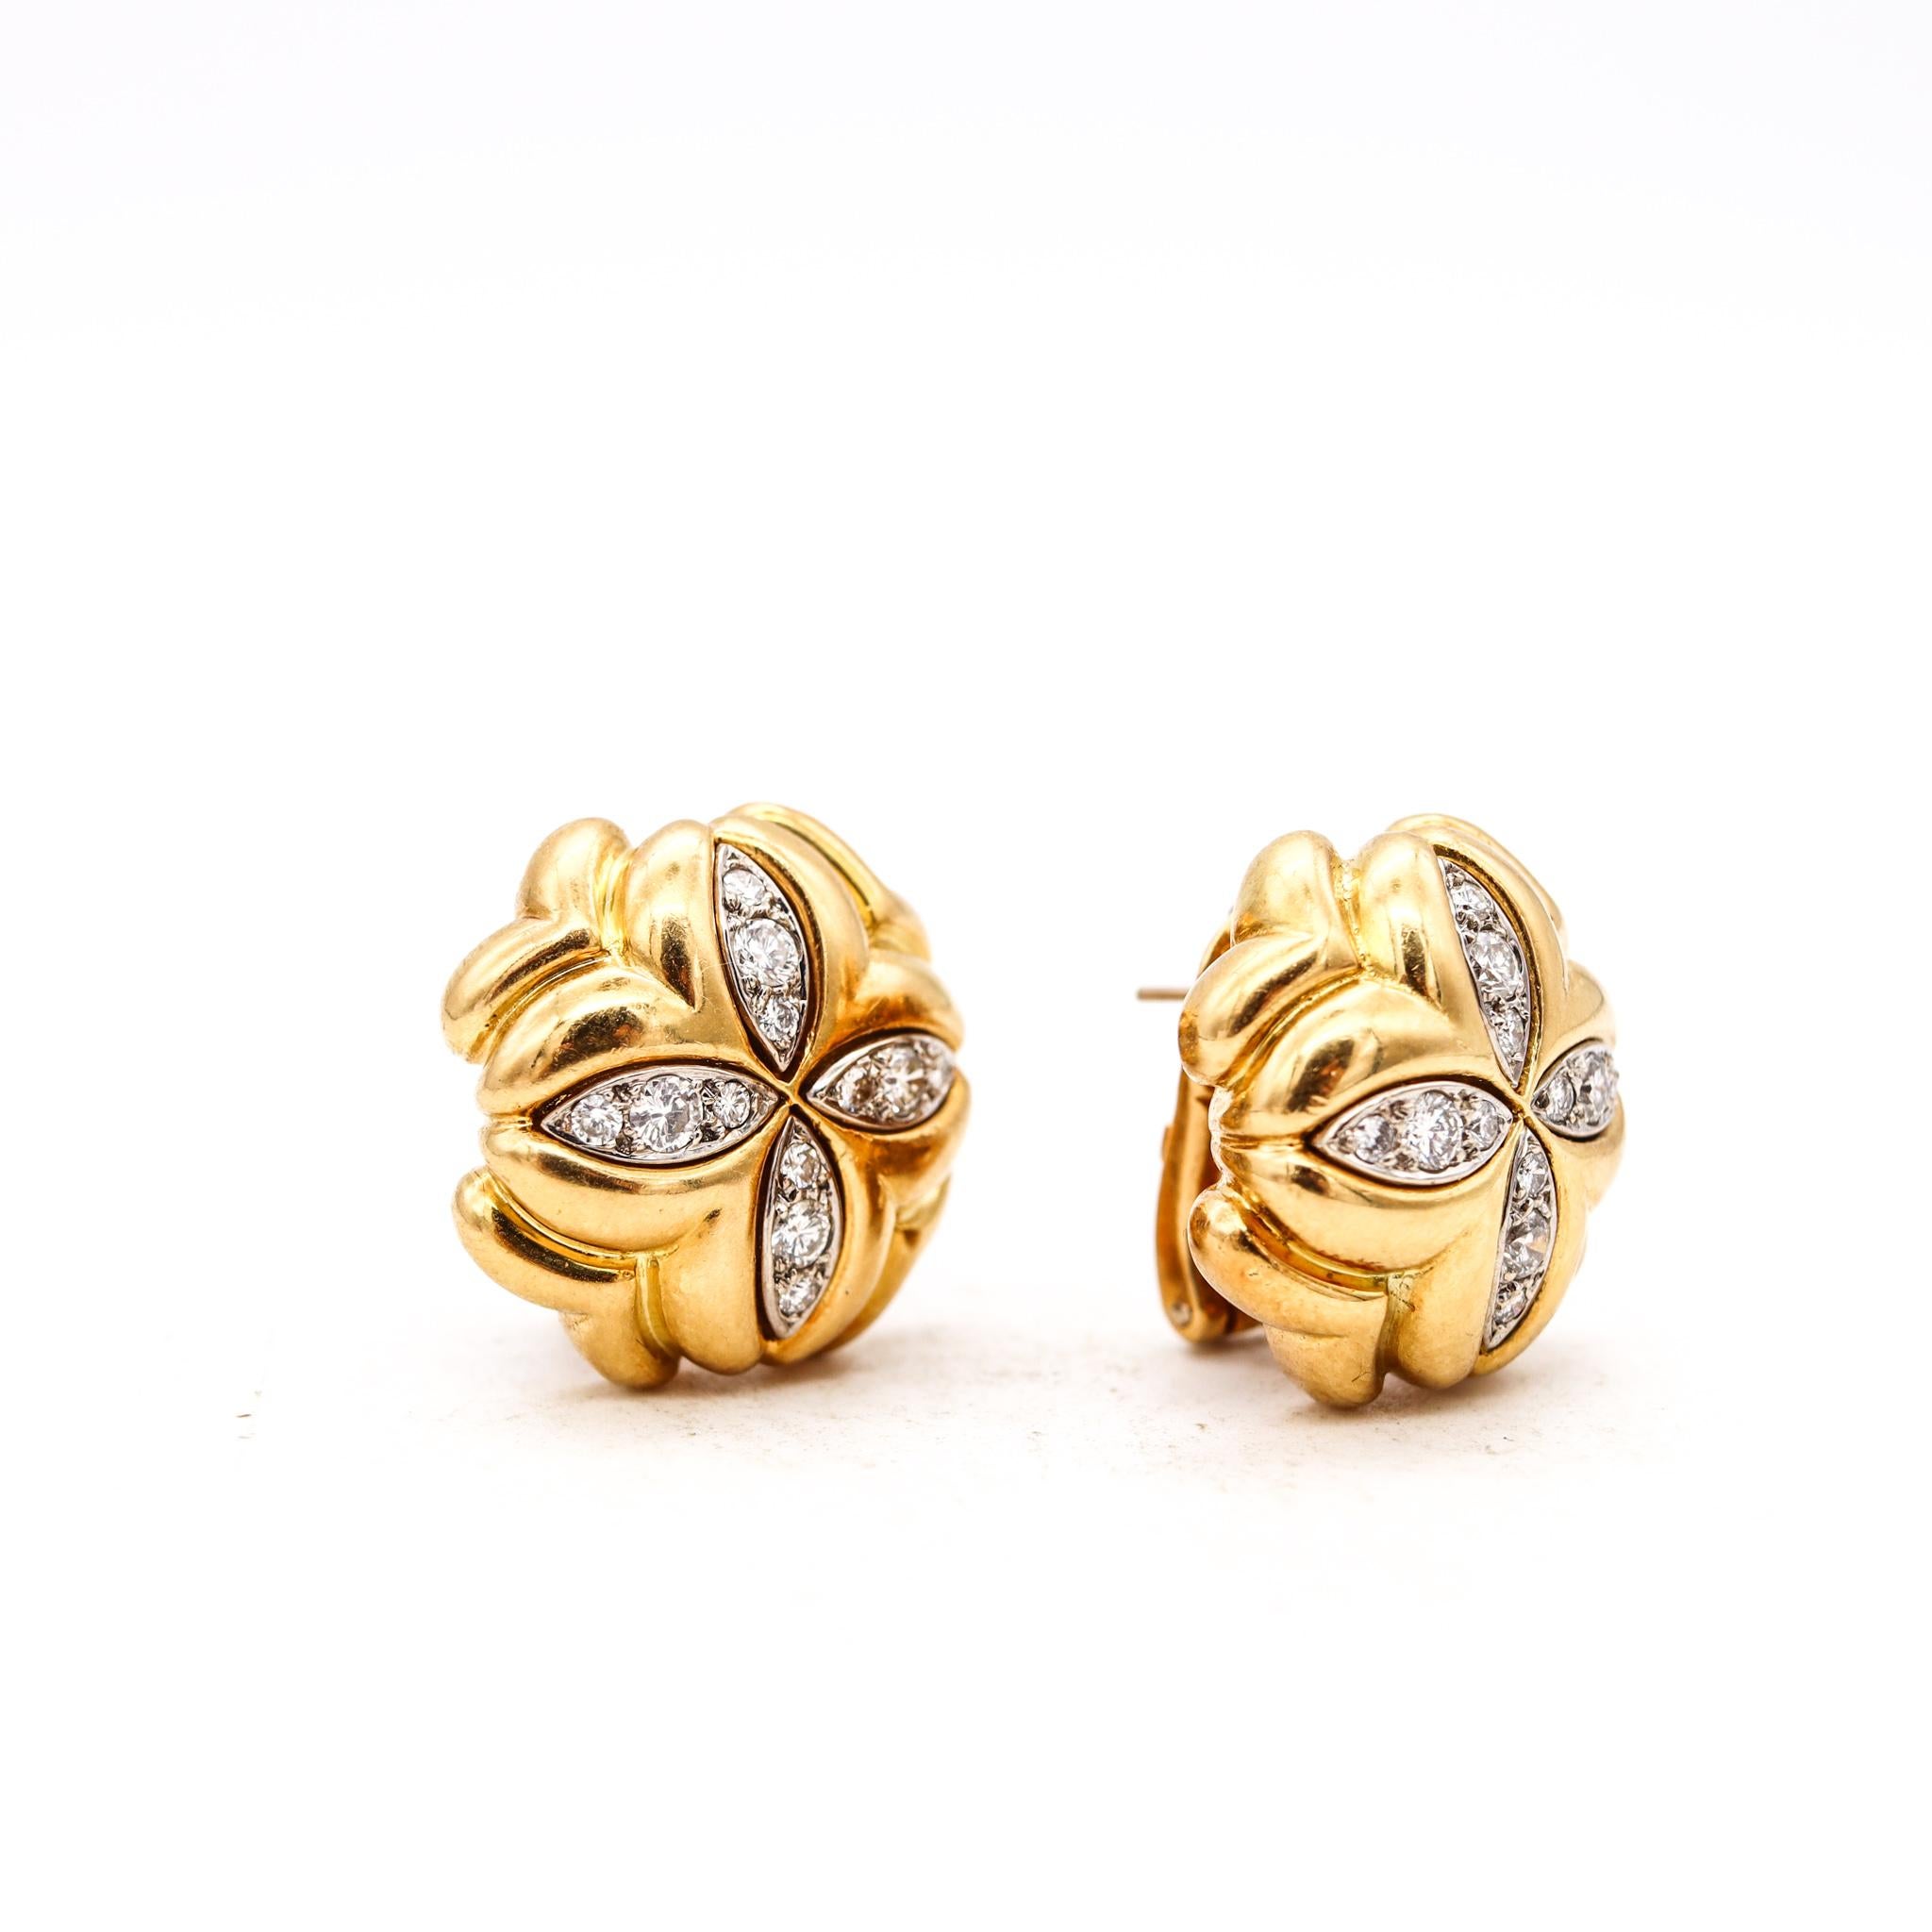 Cartier 1970 Pair Of Clovers Clips Earrings In 18Kt Yellow Gold With VS Diamonds In Excellent Condition For Sale In Miami, FL